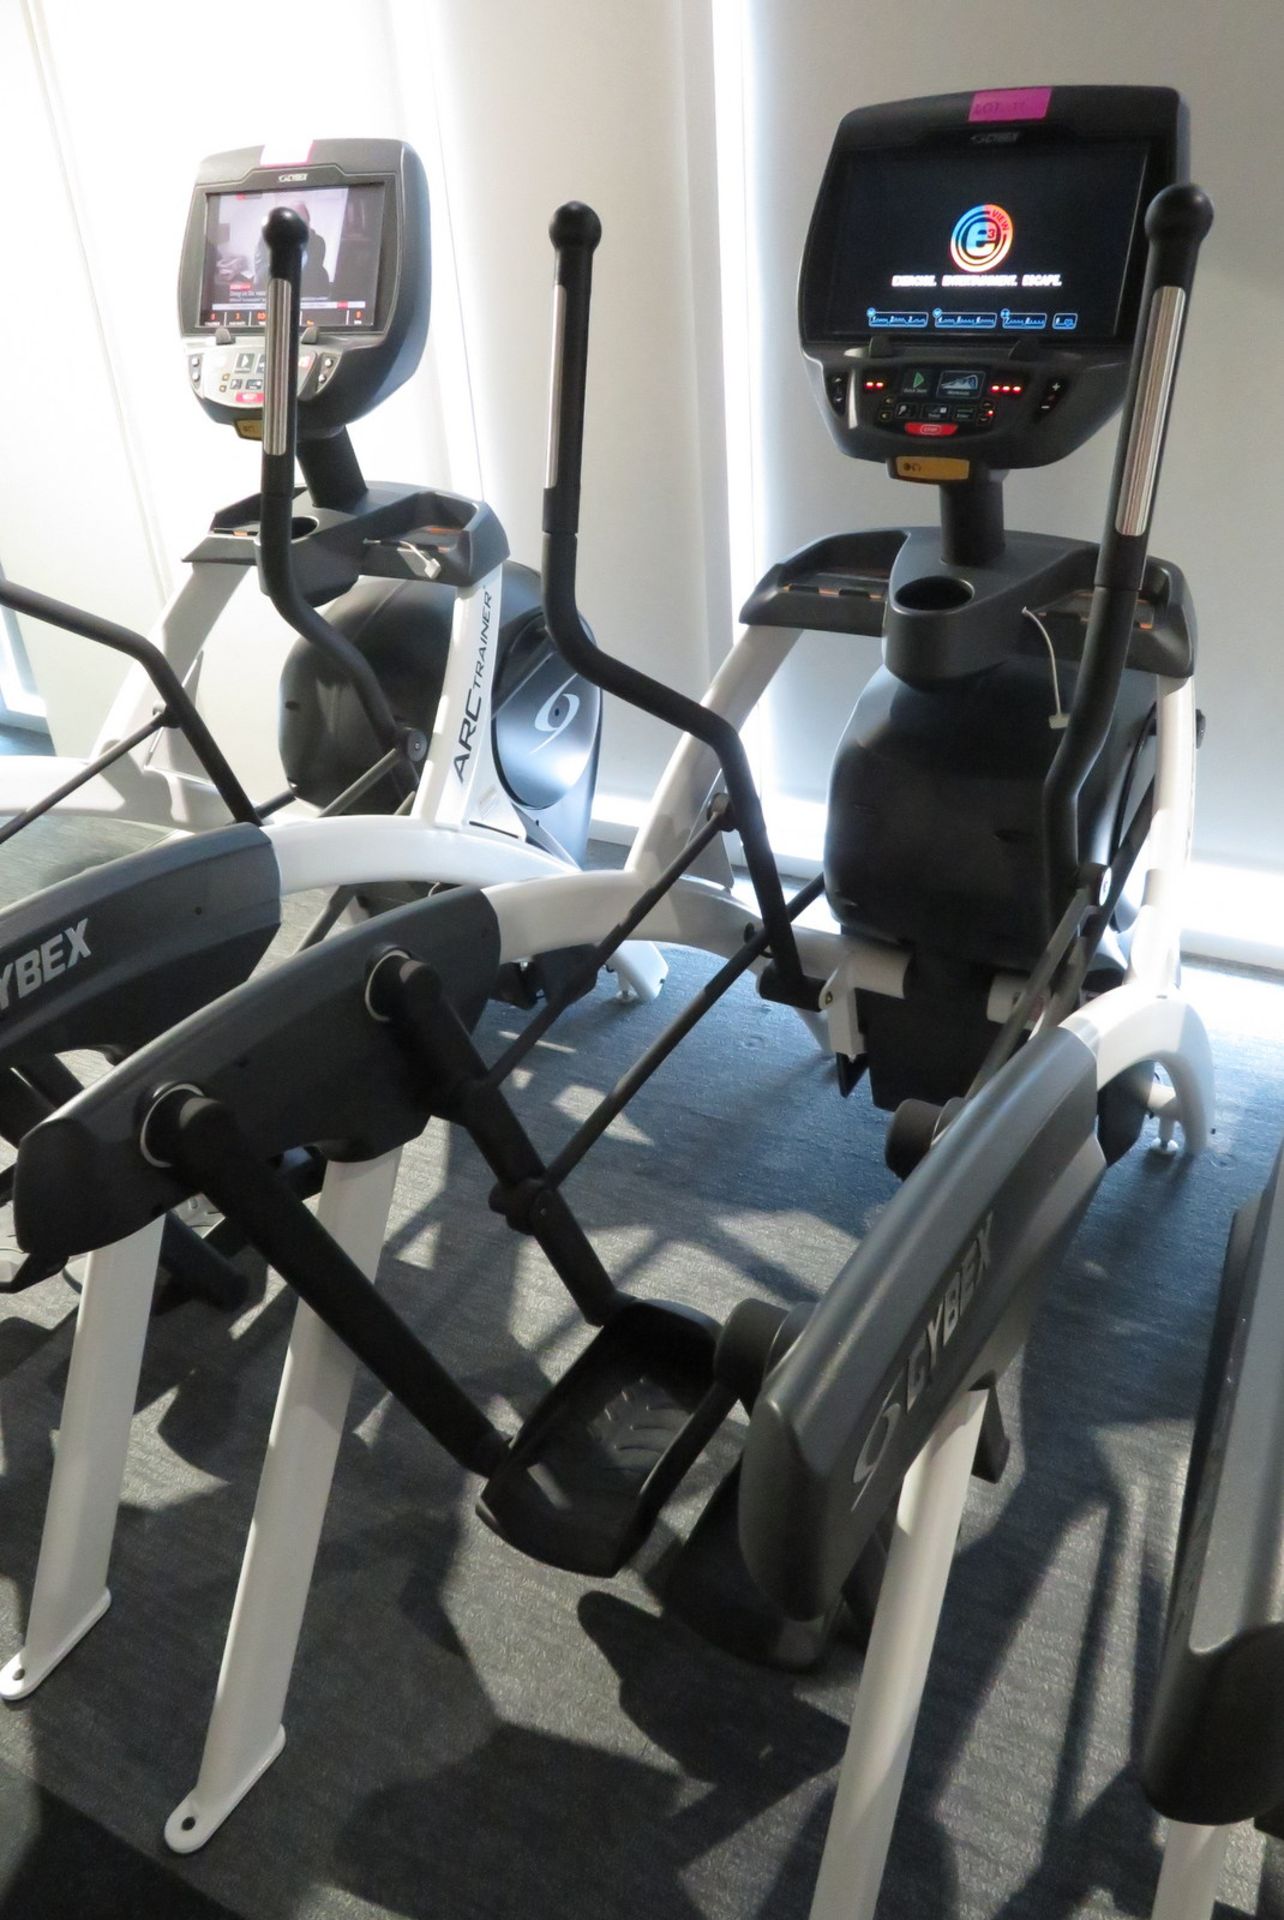 Cybex Arc Trainer Model: 627AT. Working Condition With TV Display Monitor.